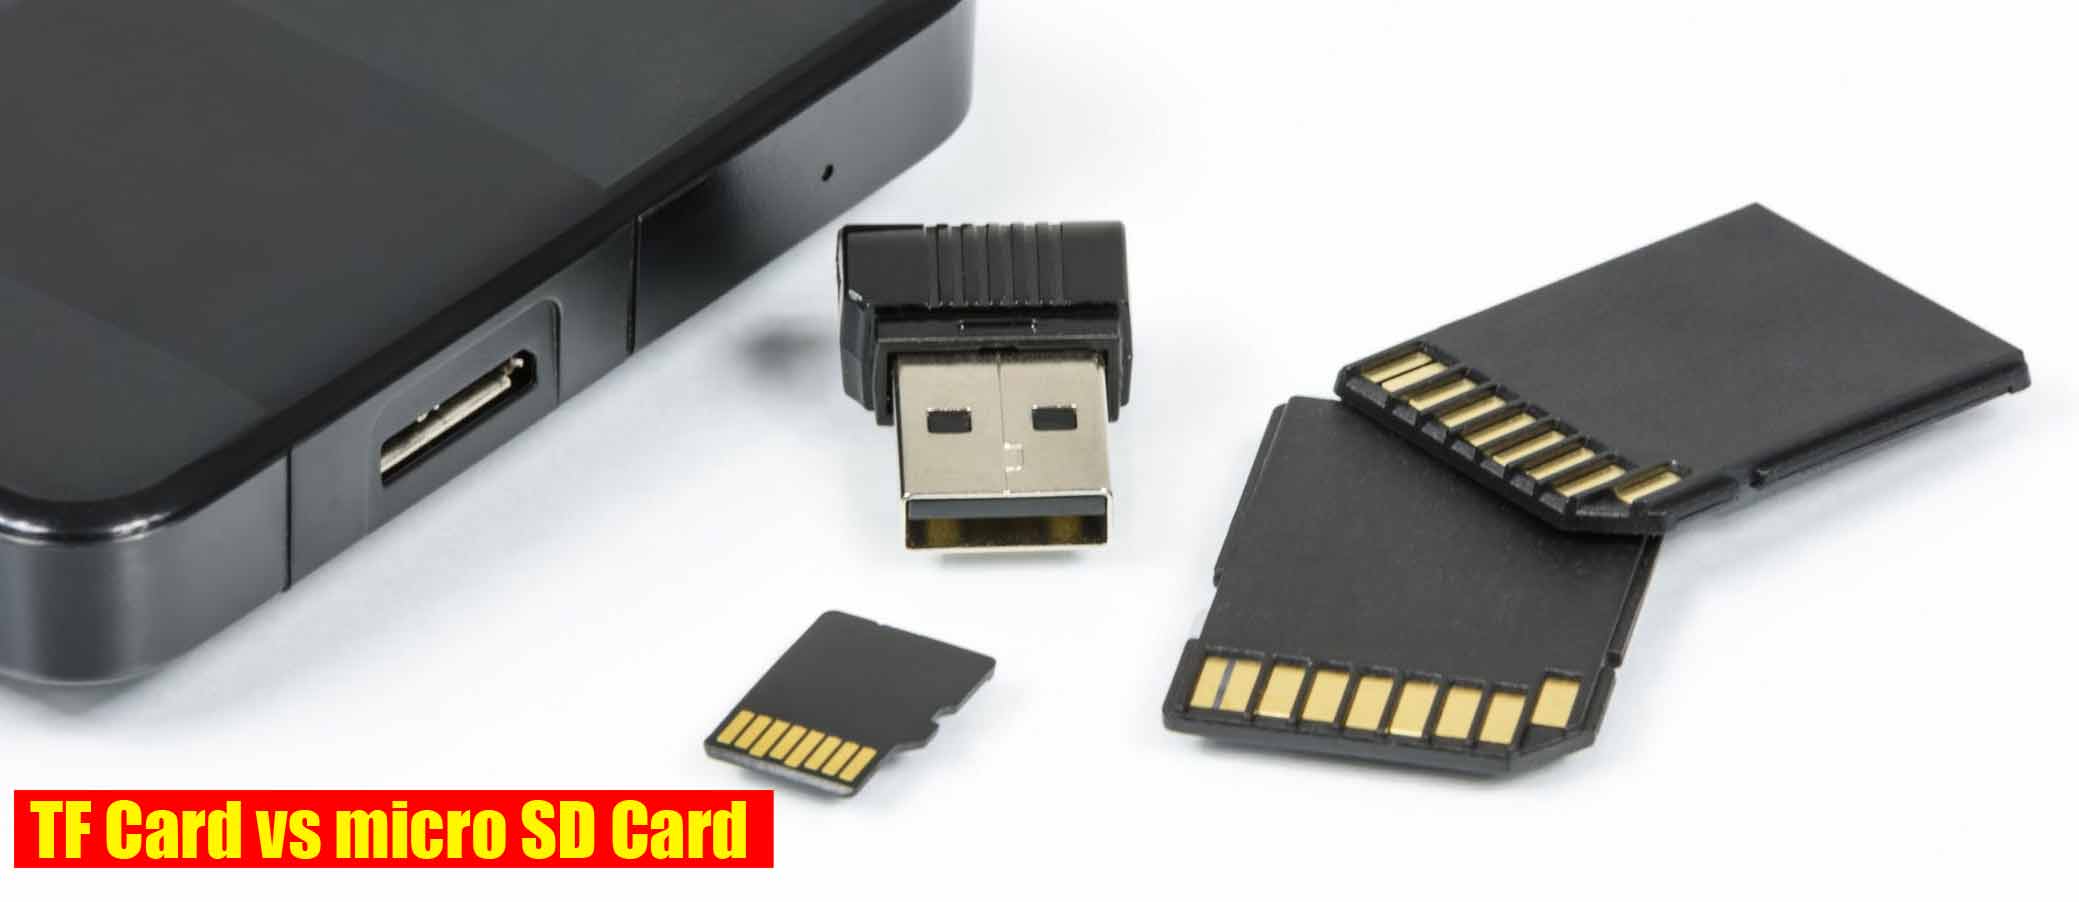 Differences between TF Card and Micro SD card